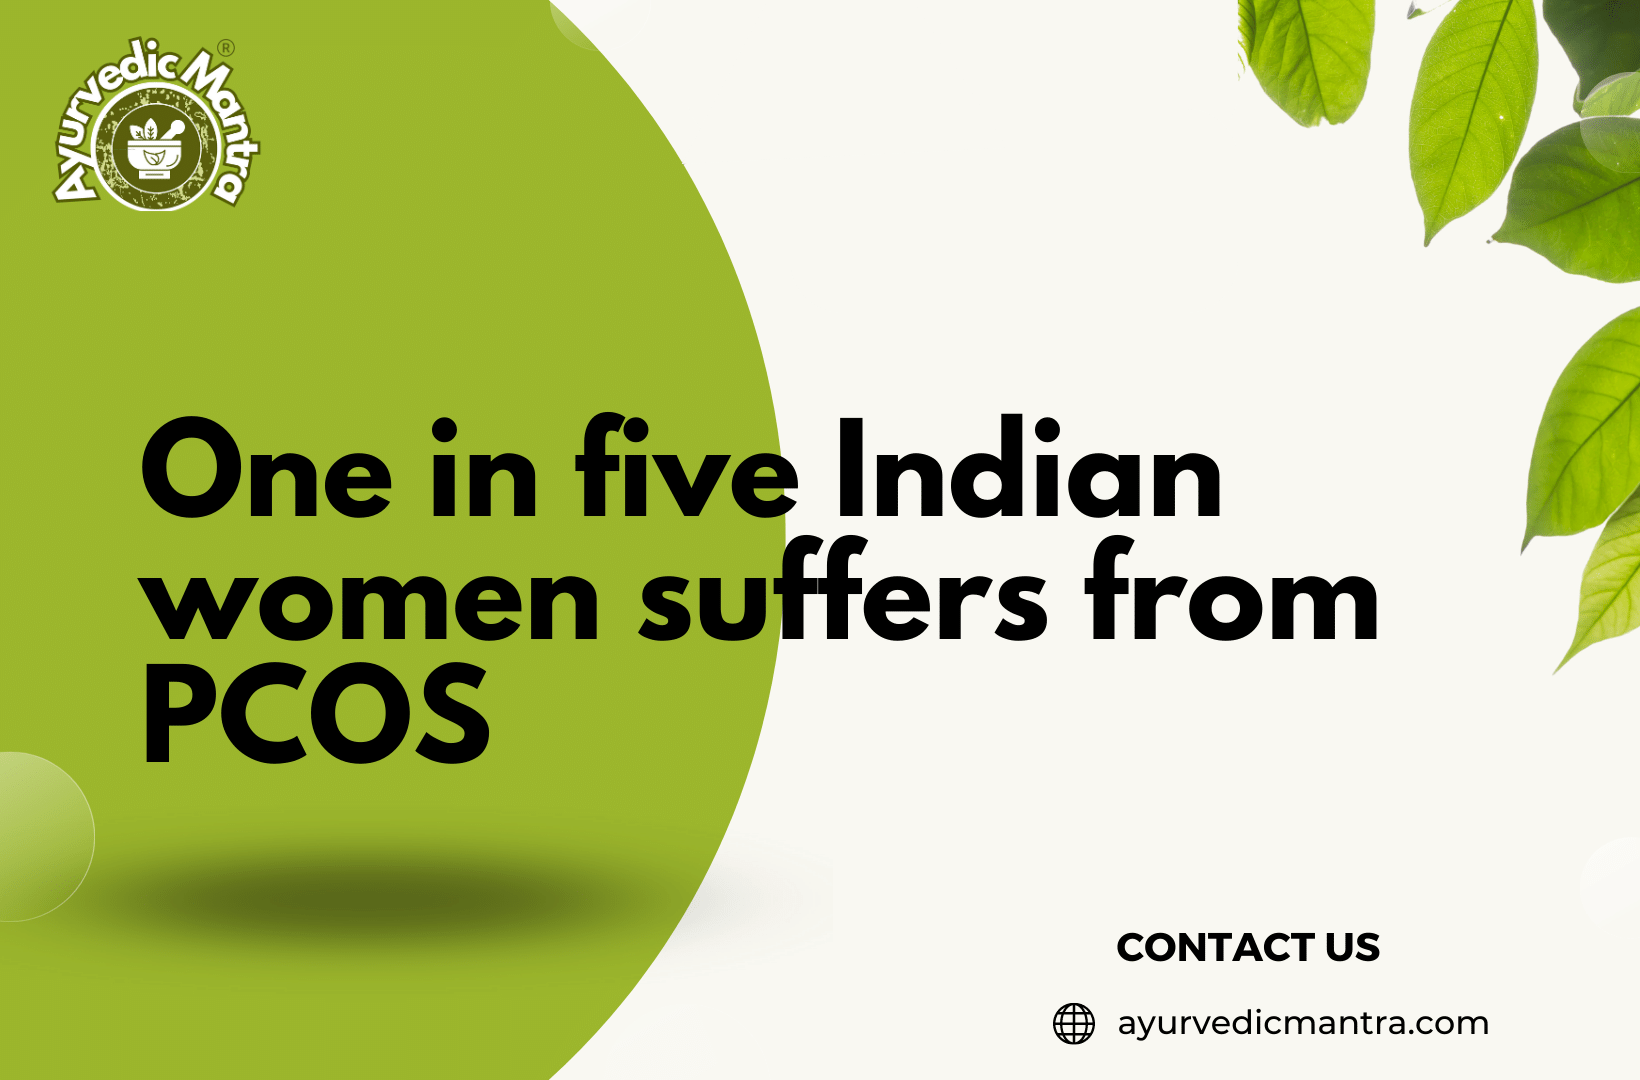 One in five Indian women suffers from PCOS